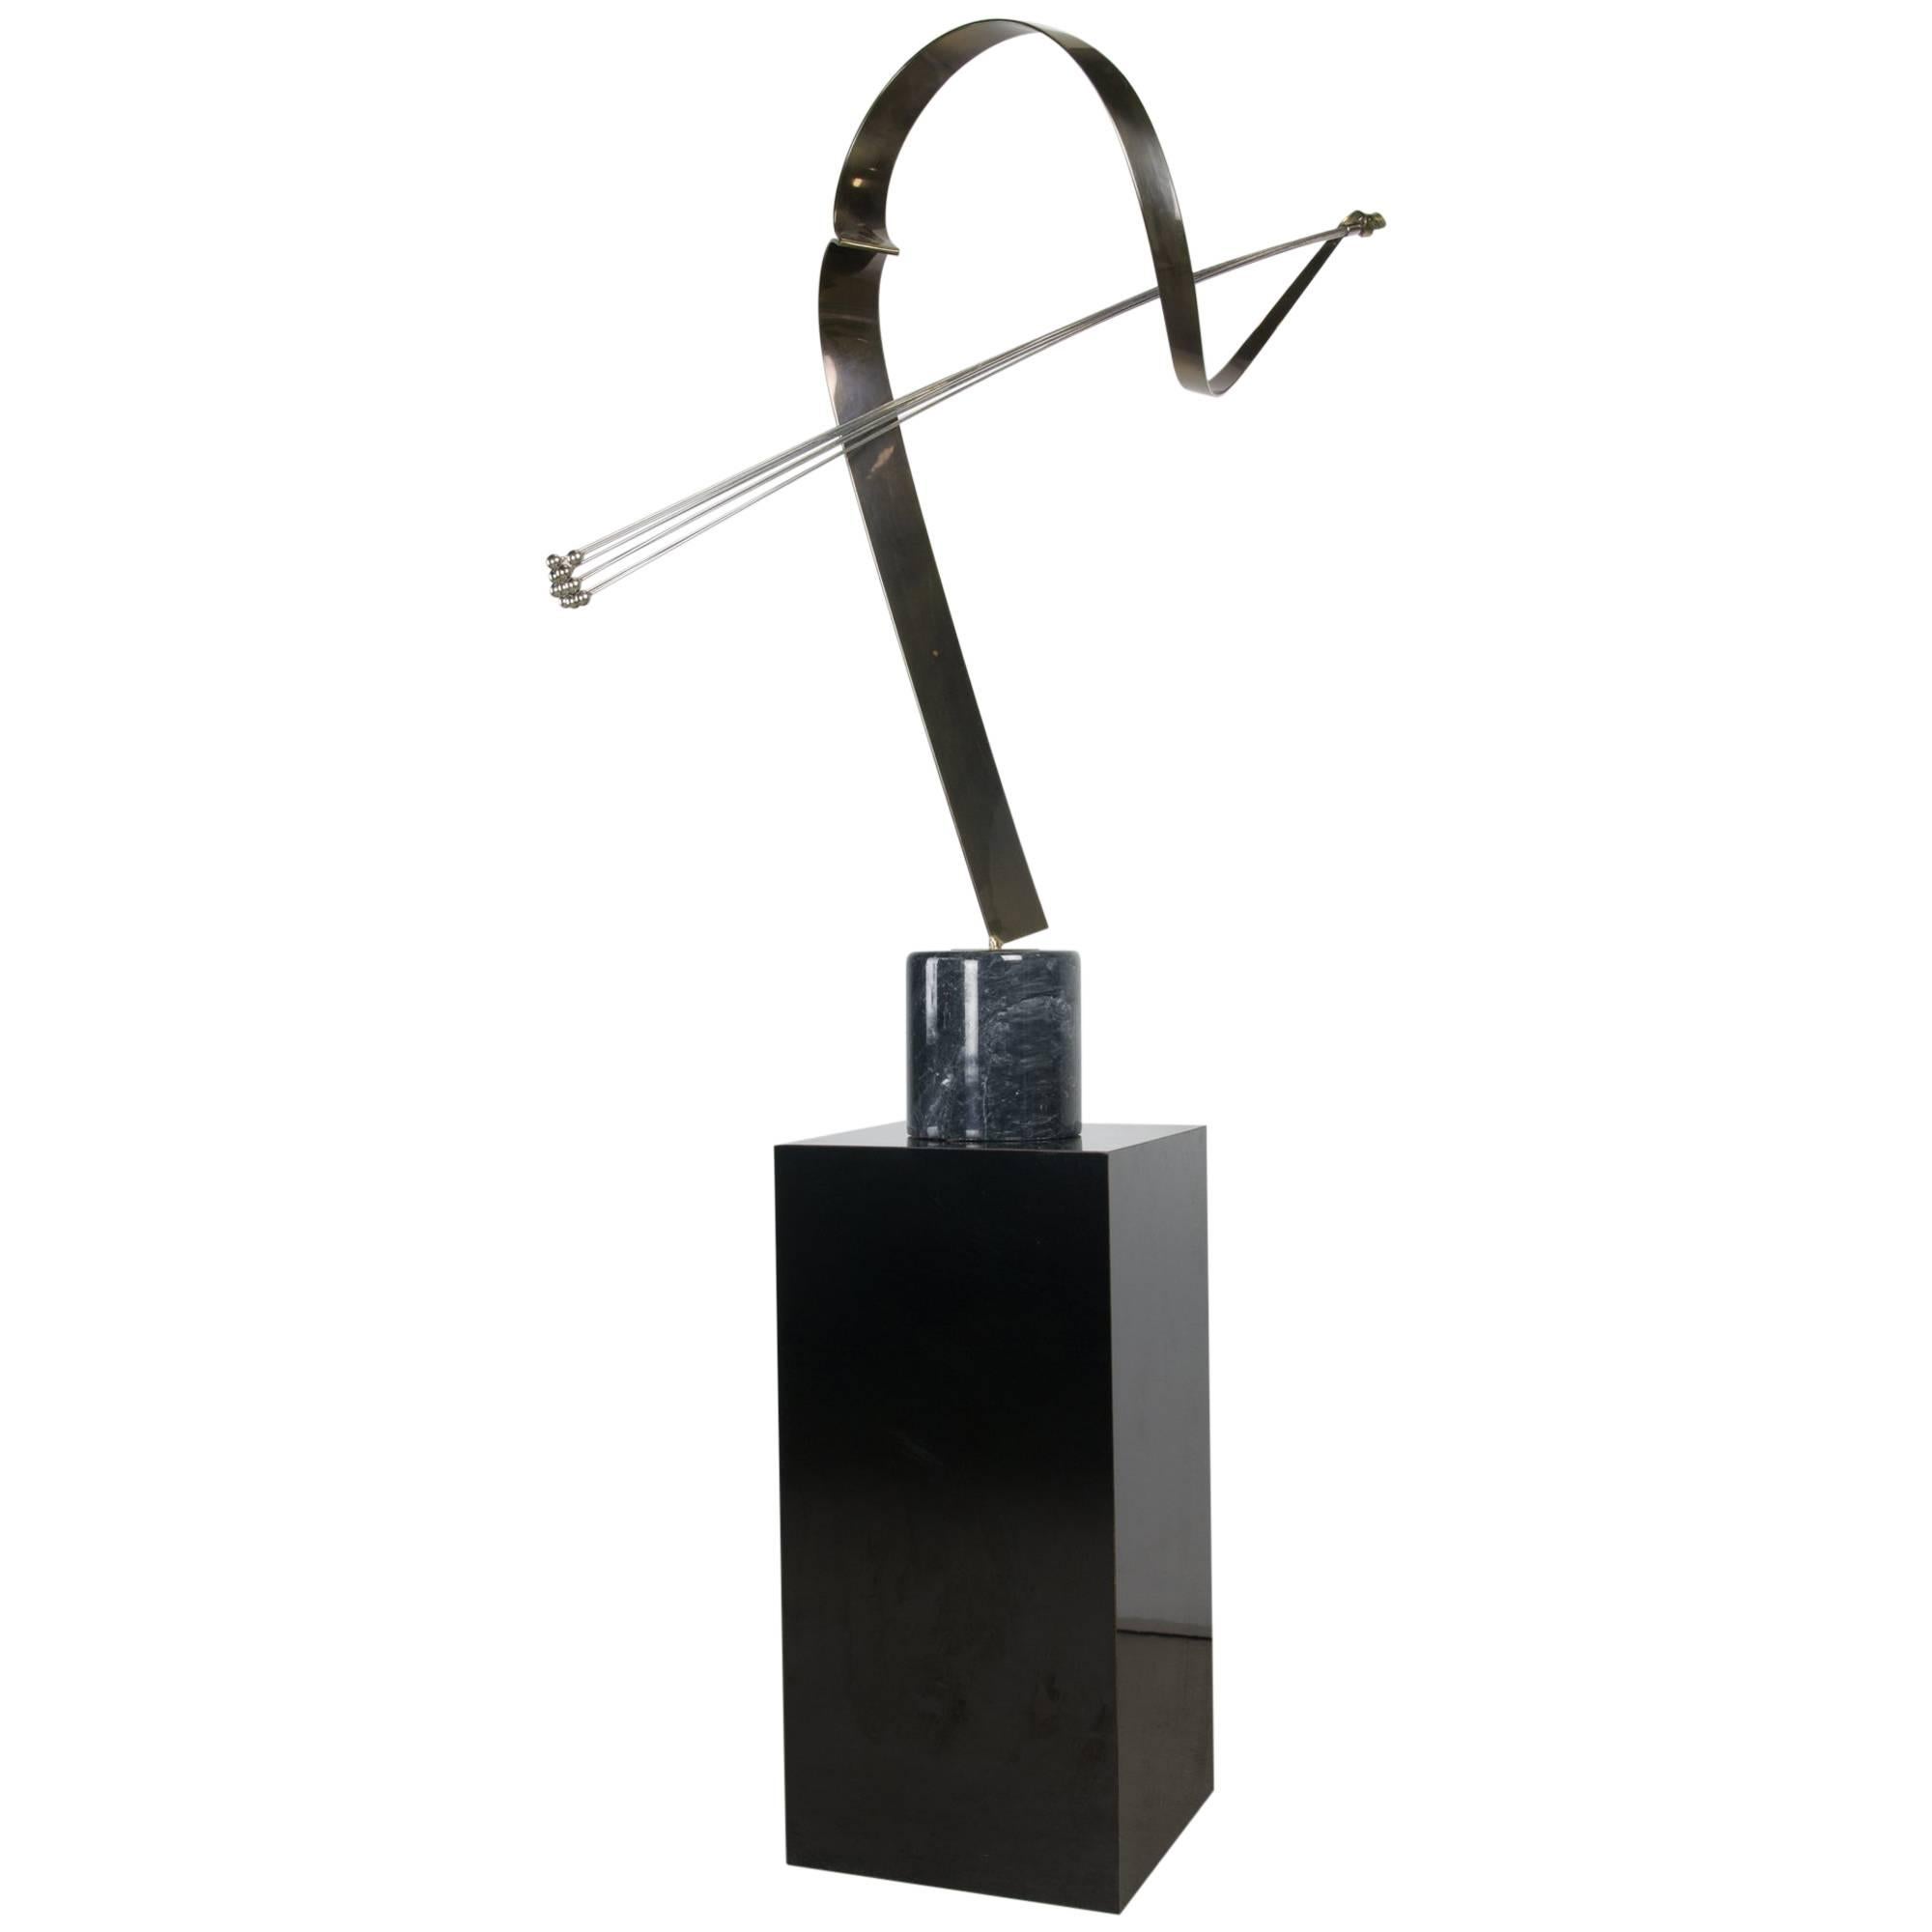 Curtis Jere Brass Spray Sculpture on Marble Base with Pedestal